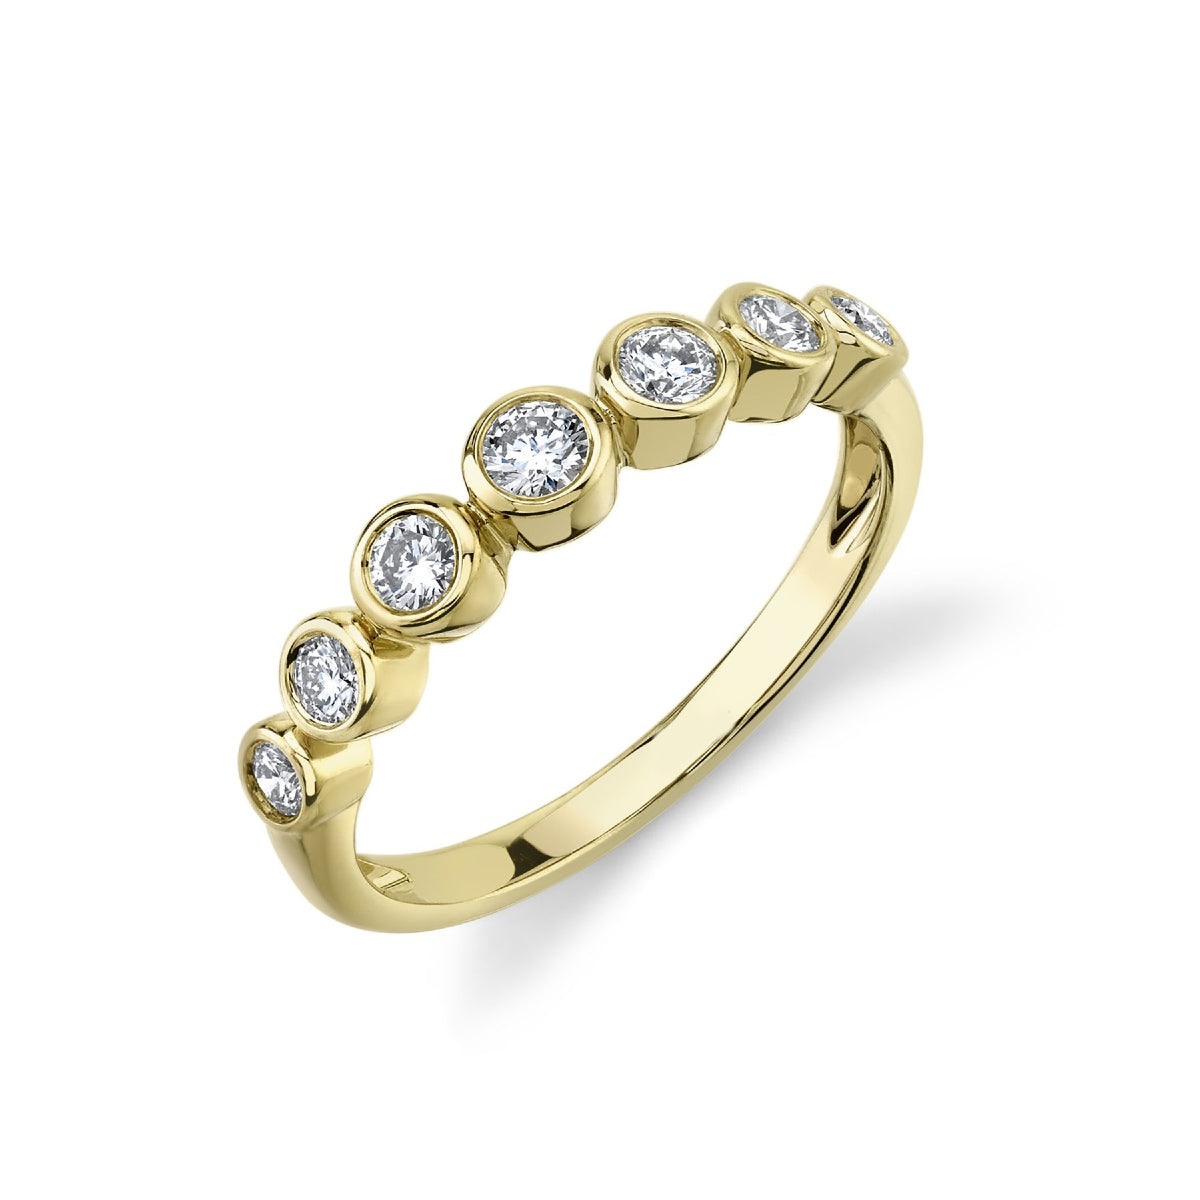 Showroom of 22ct. gold ring for round shape grga-00006 | Jewelxy - 134703